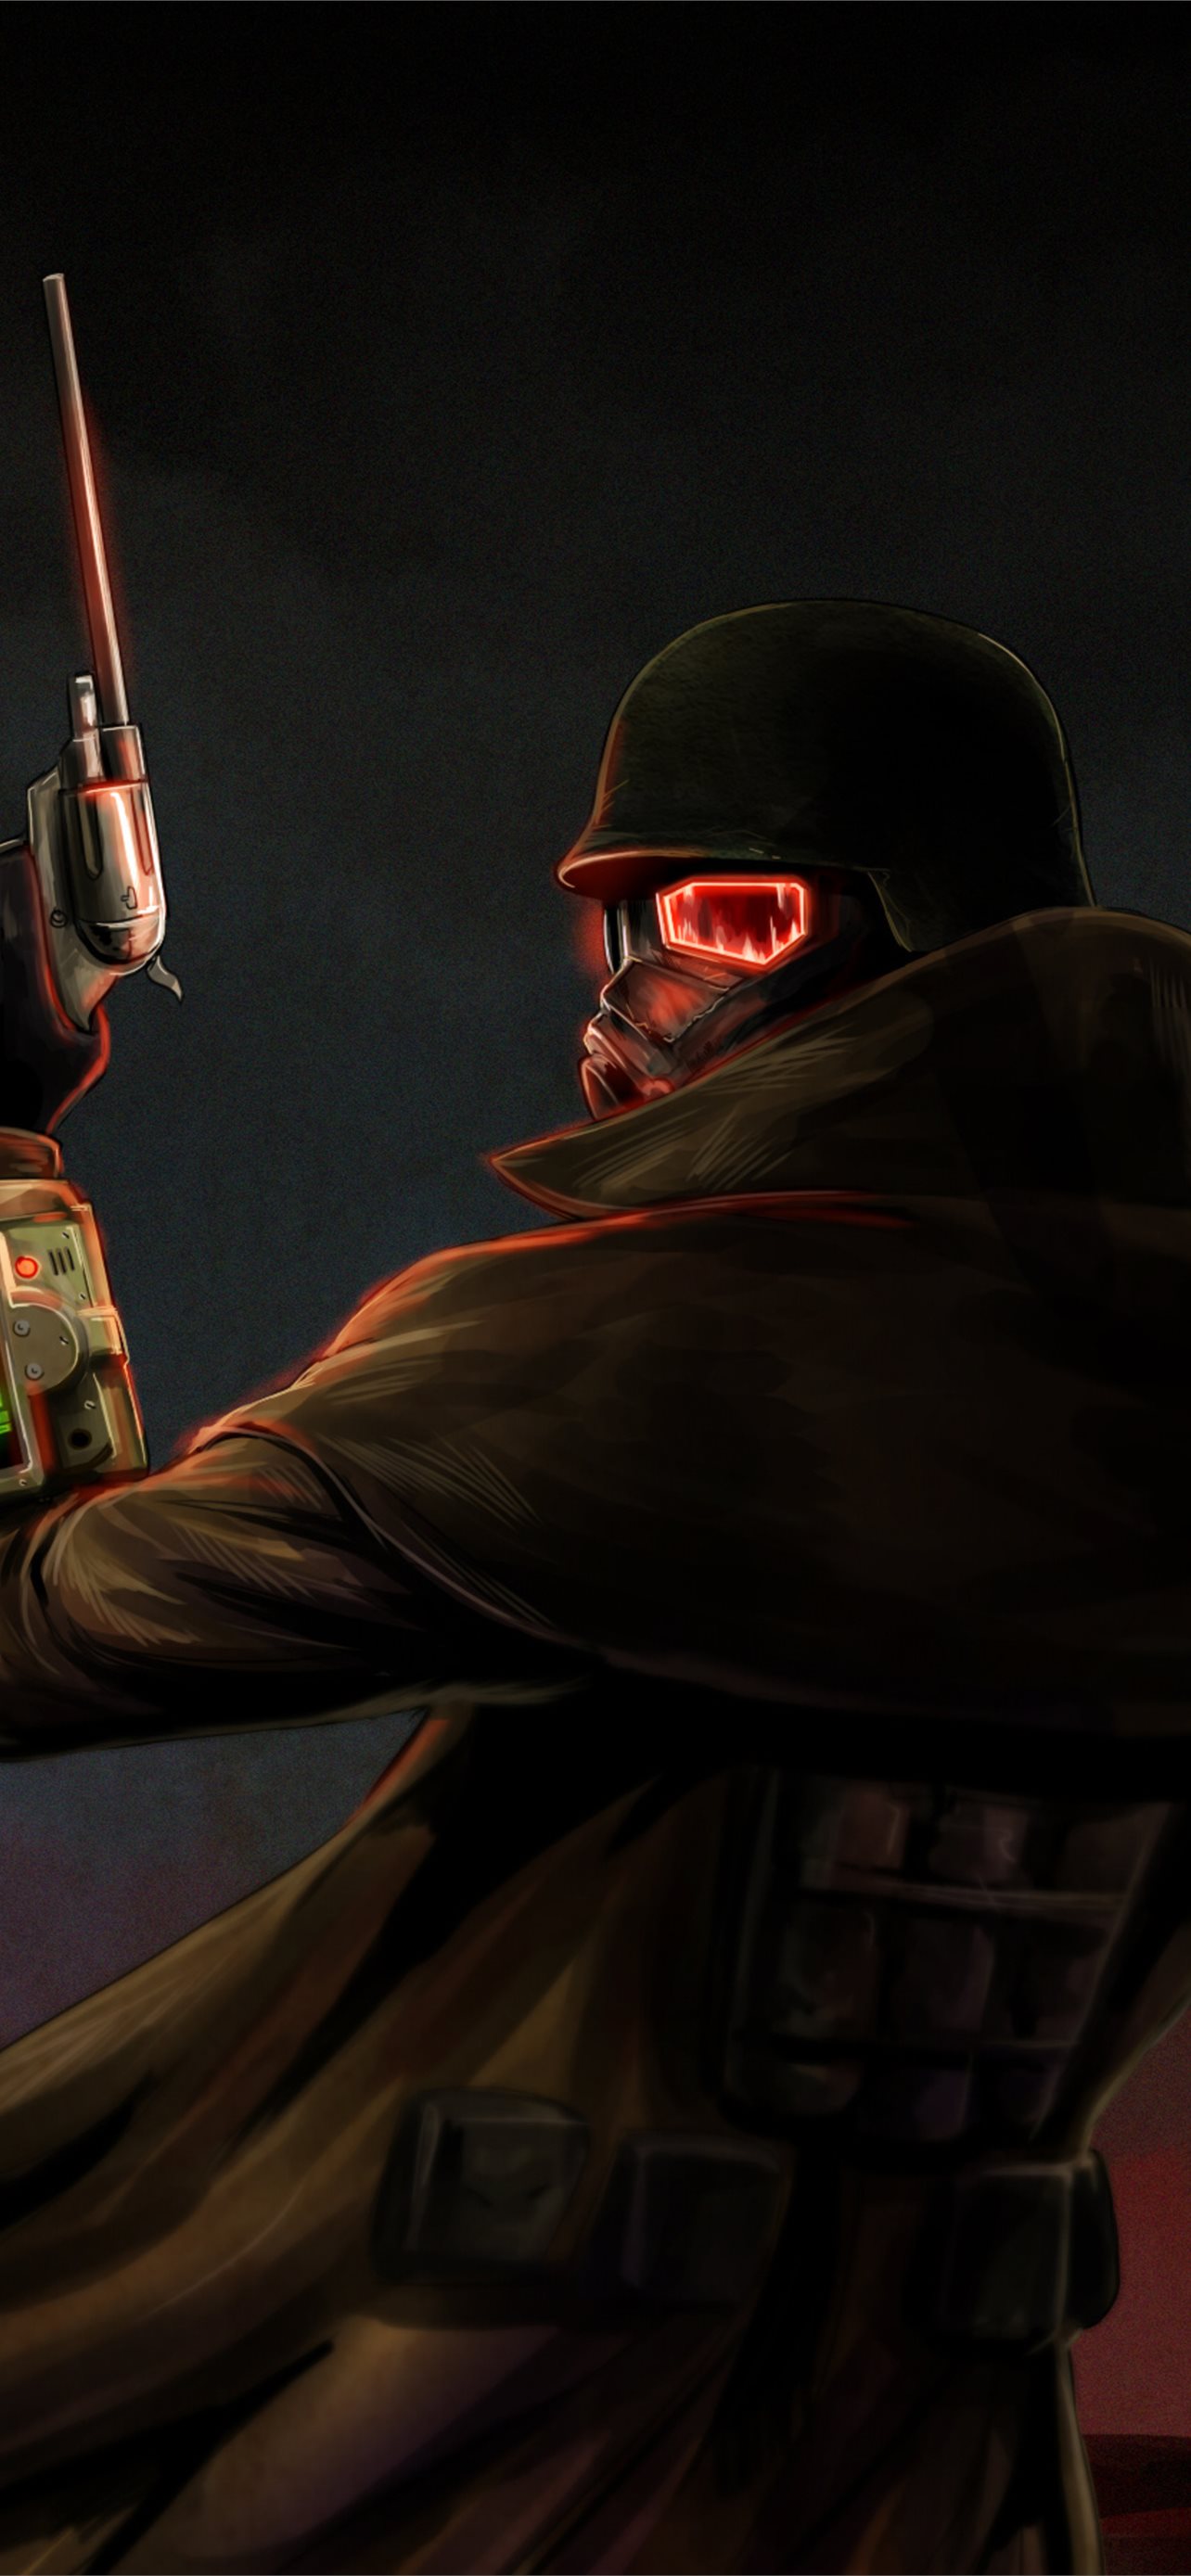 Fallout NCR Wallpapers on WallpaperDog